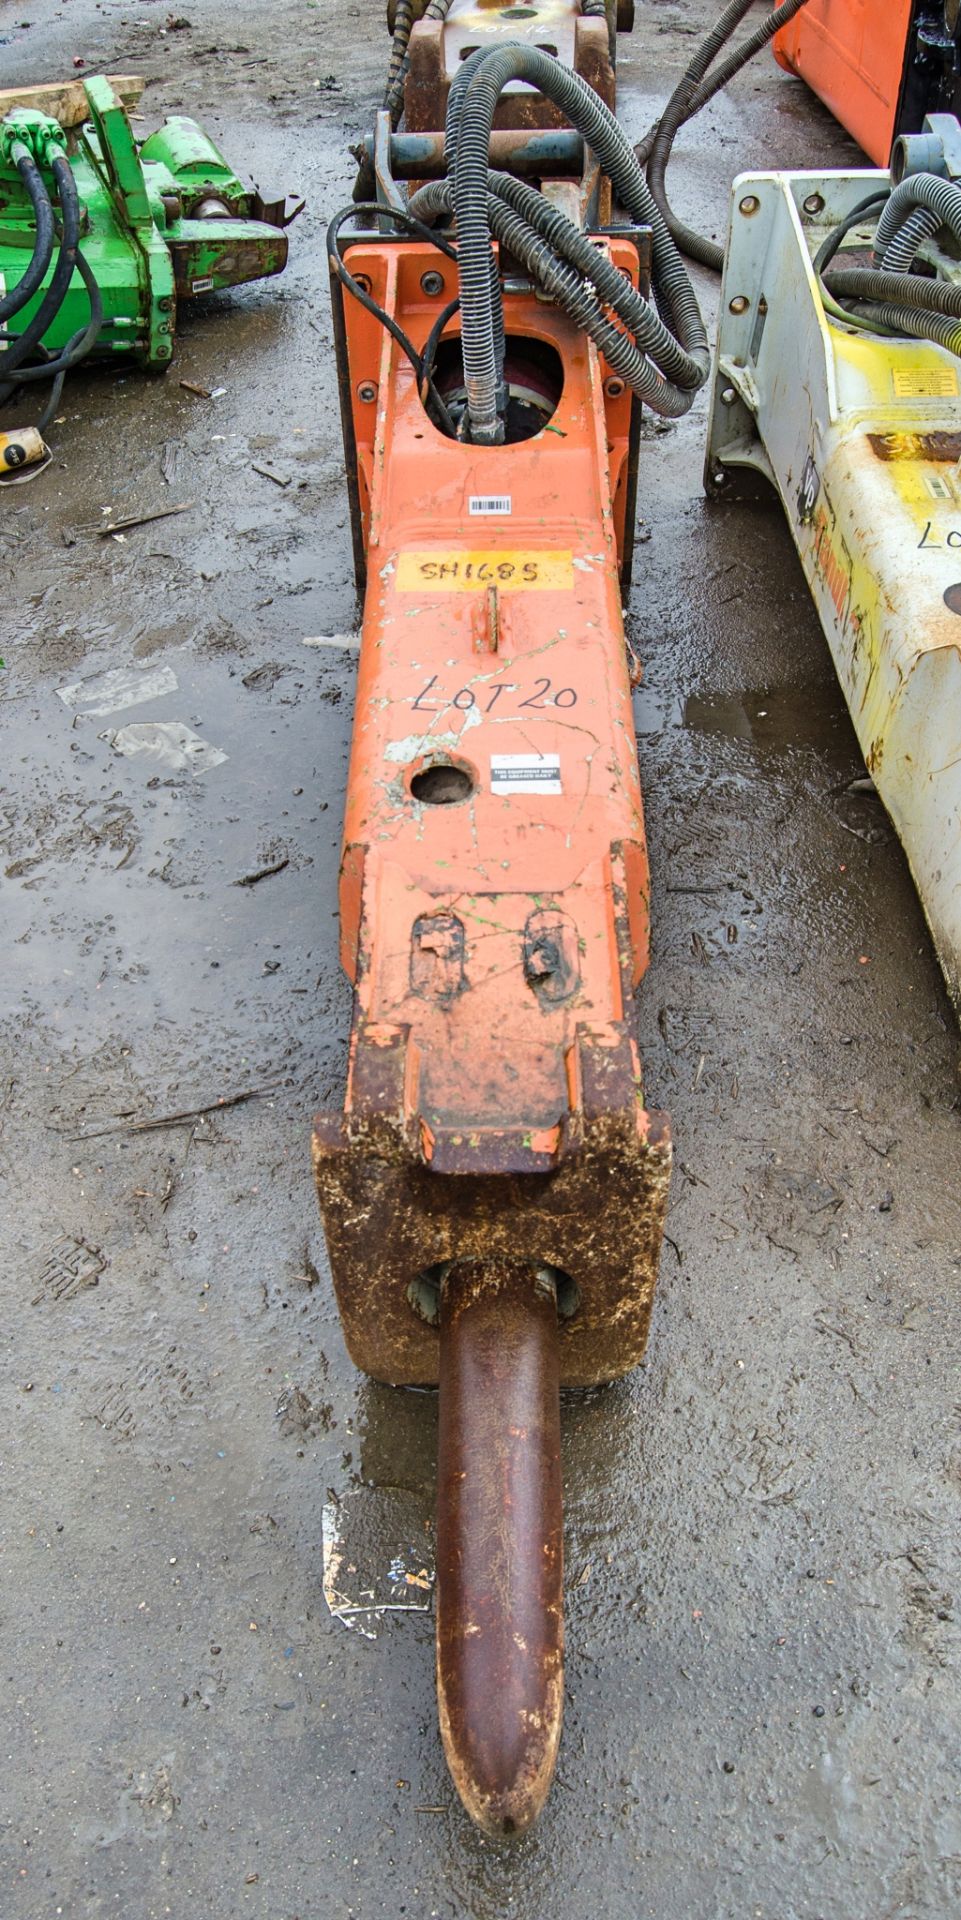 Construction Tools RX14L hydraulic breaker to suit 13-18 tonne excavator Year: 2019 S/N: DEQ191642 - Image 3 of 4